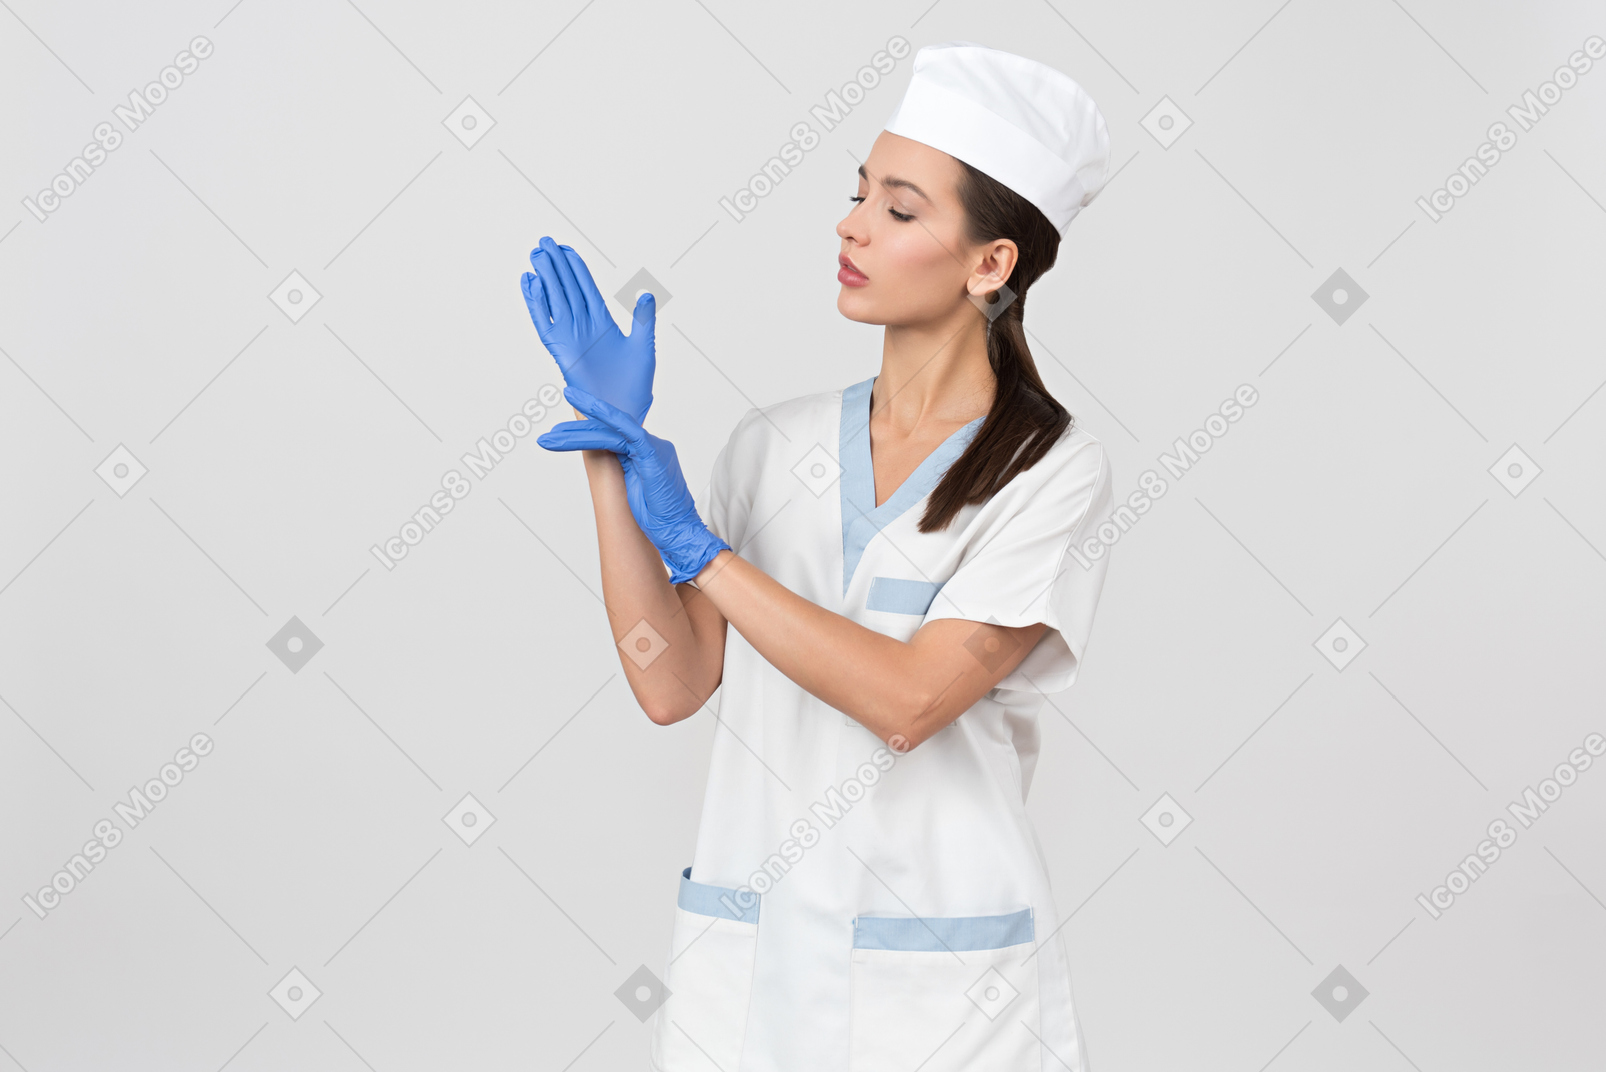 Attractive nurse in a medical robe putting on latex gloves